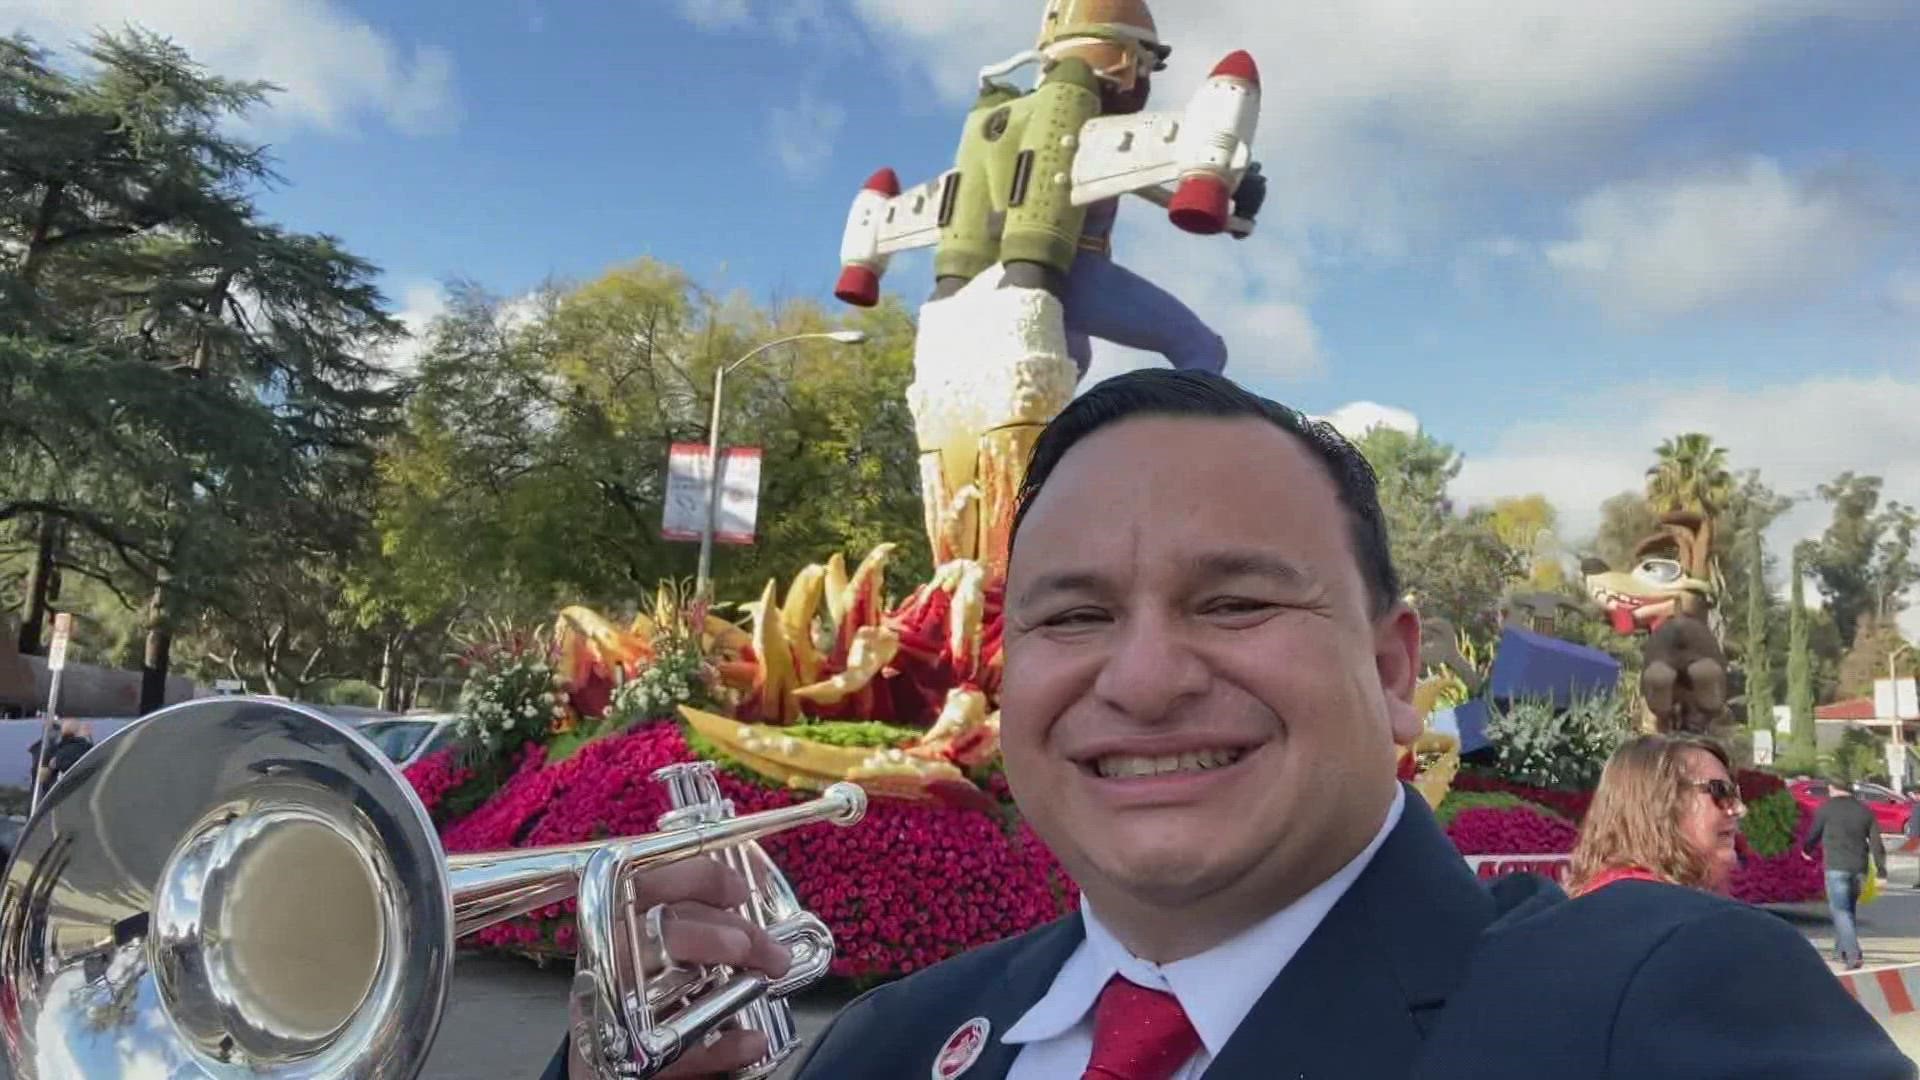 Mount Vernon High School Band Director Ramon Rivera was chosen from hundreds of band directors across the country to march in the New Year's Day parade.